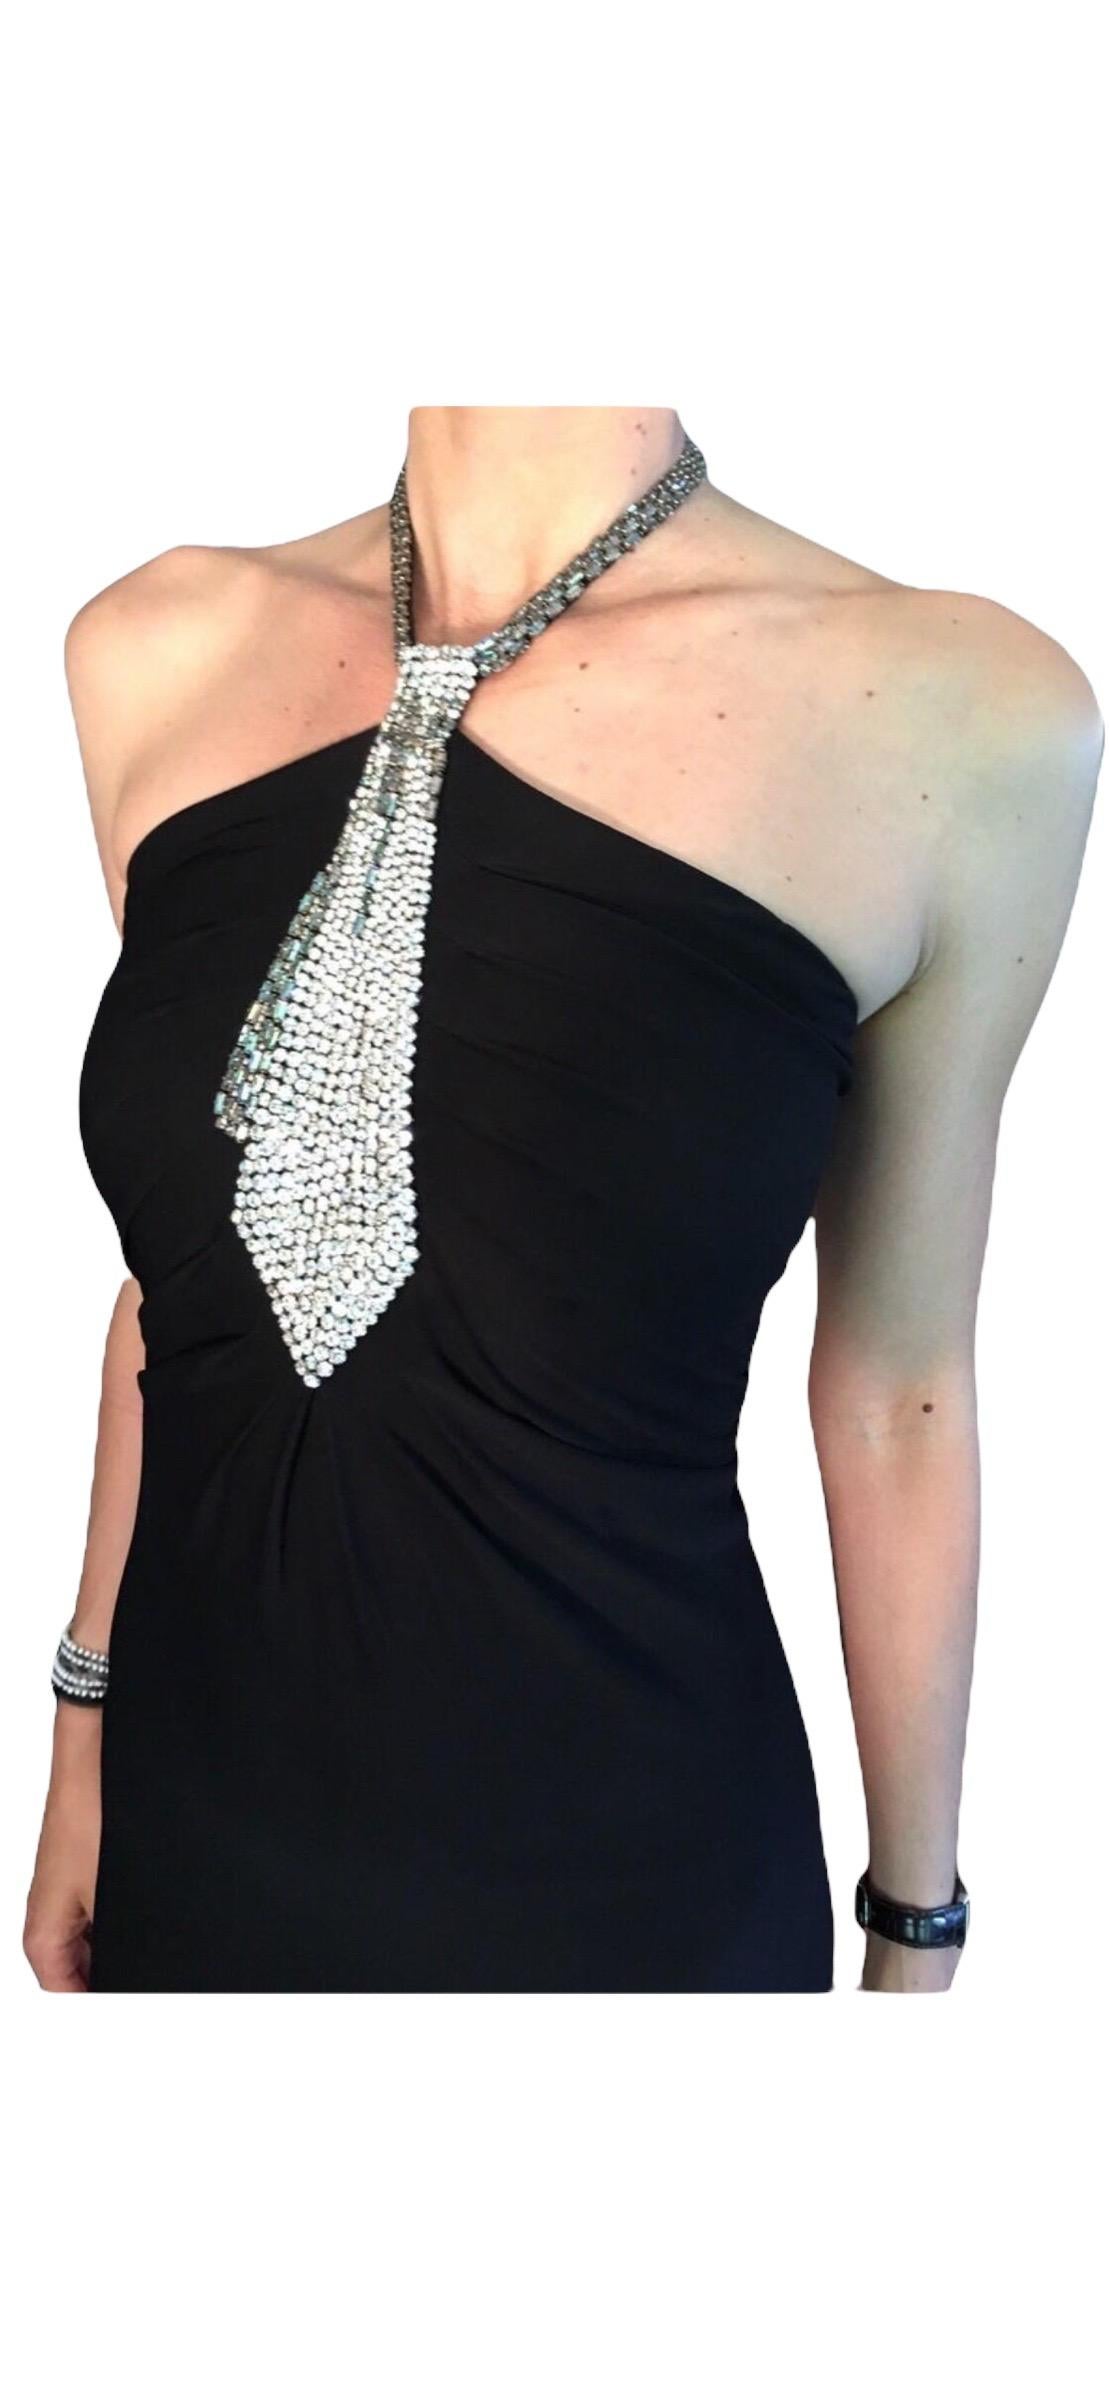  Azzaro Couture Iconic Crystal Jeweled Embellished Black Evening Dress Gown 2